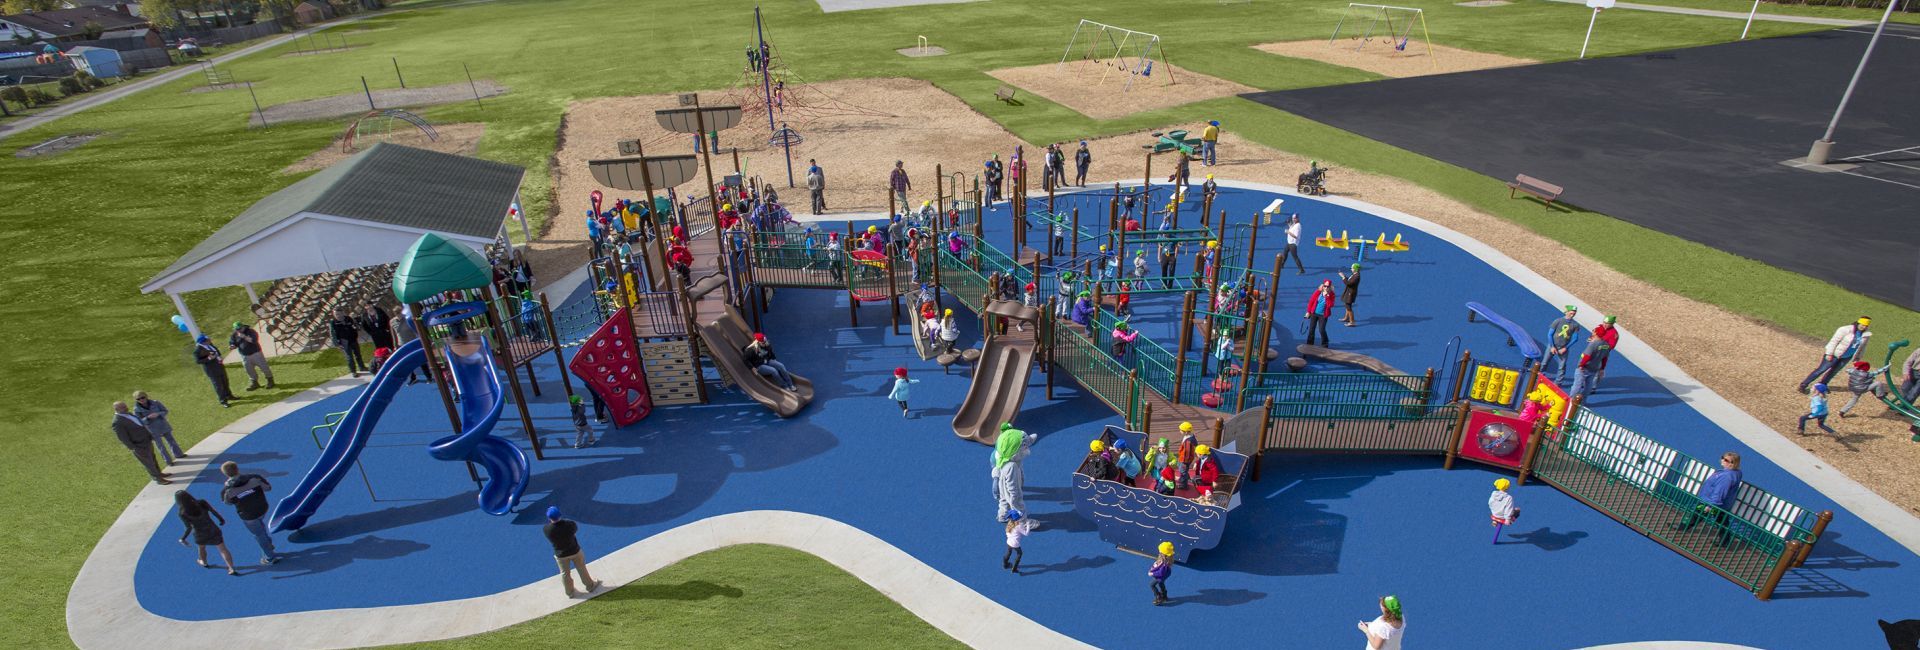 Featured image of Aerial view of park on blue turf with several children playing on it